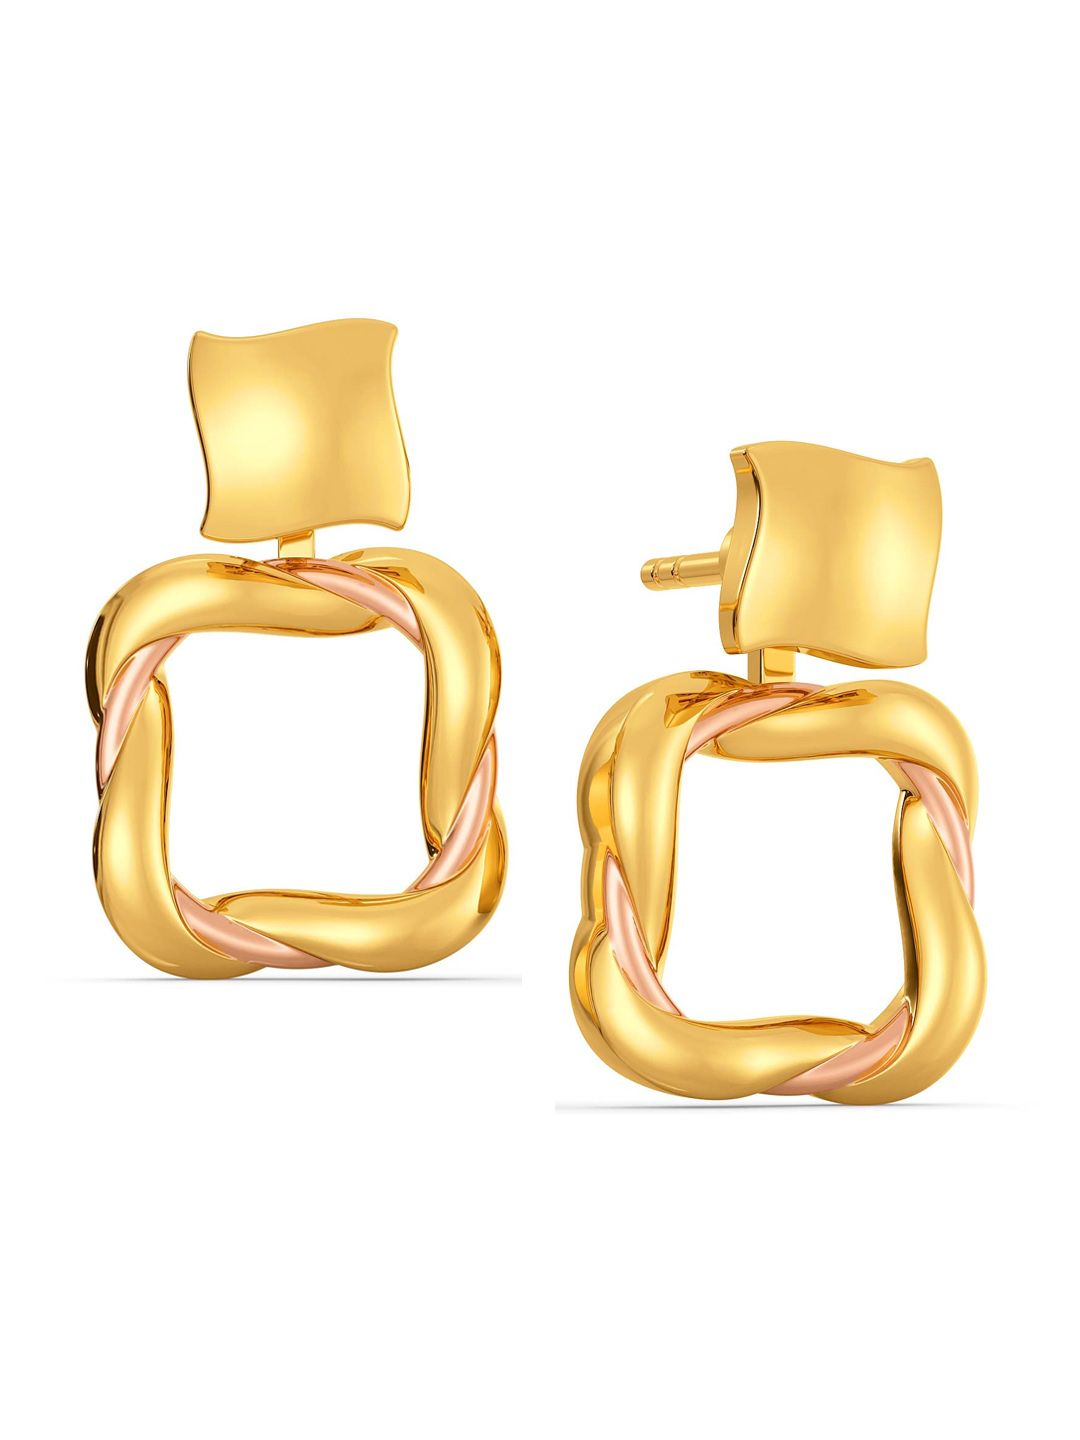 7 Earrings to Pair for Your BacktoWork Look Style  Melorra